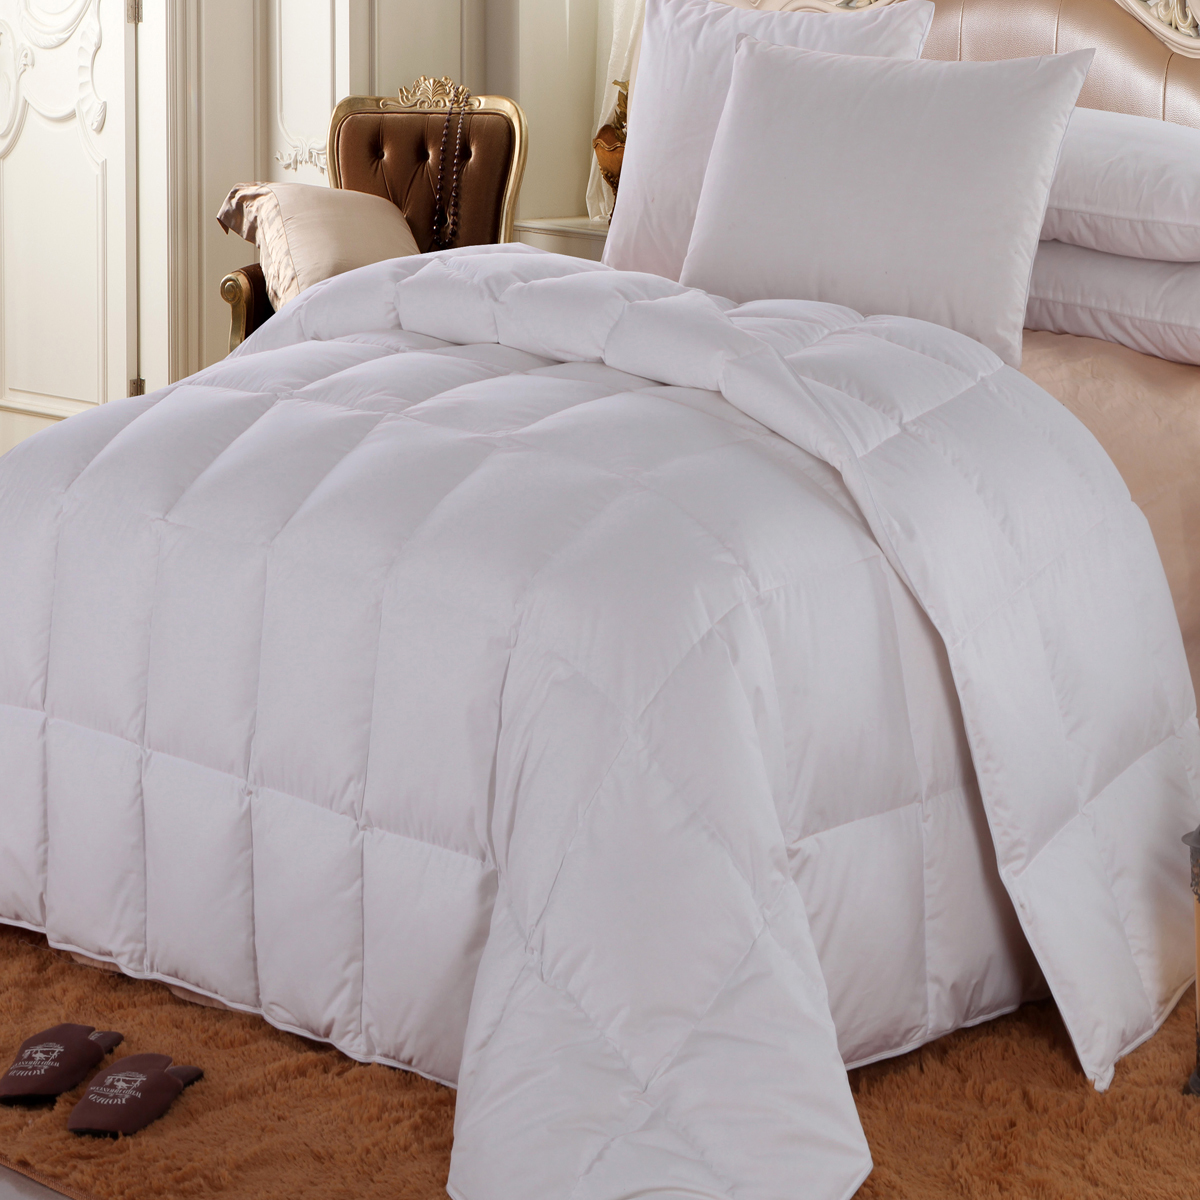 GoLinens Luxury Premium Extra Long Staple Combed Cotton ALL YEAR GOOSE DOWN Hypoallergenic Comforter With Box Stitch Design - White Solid